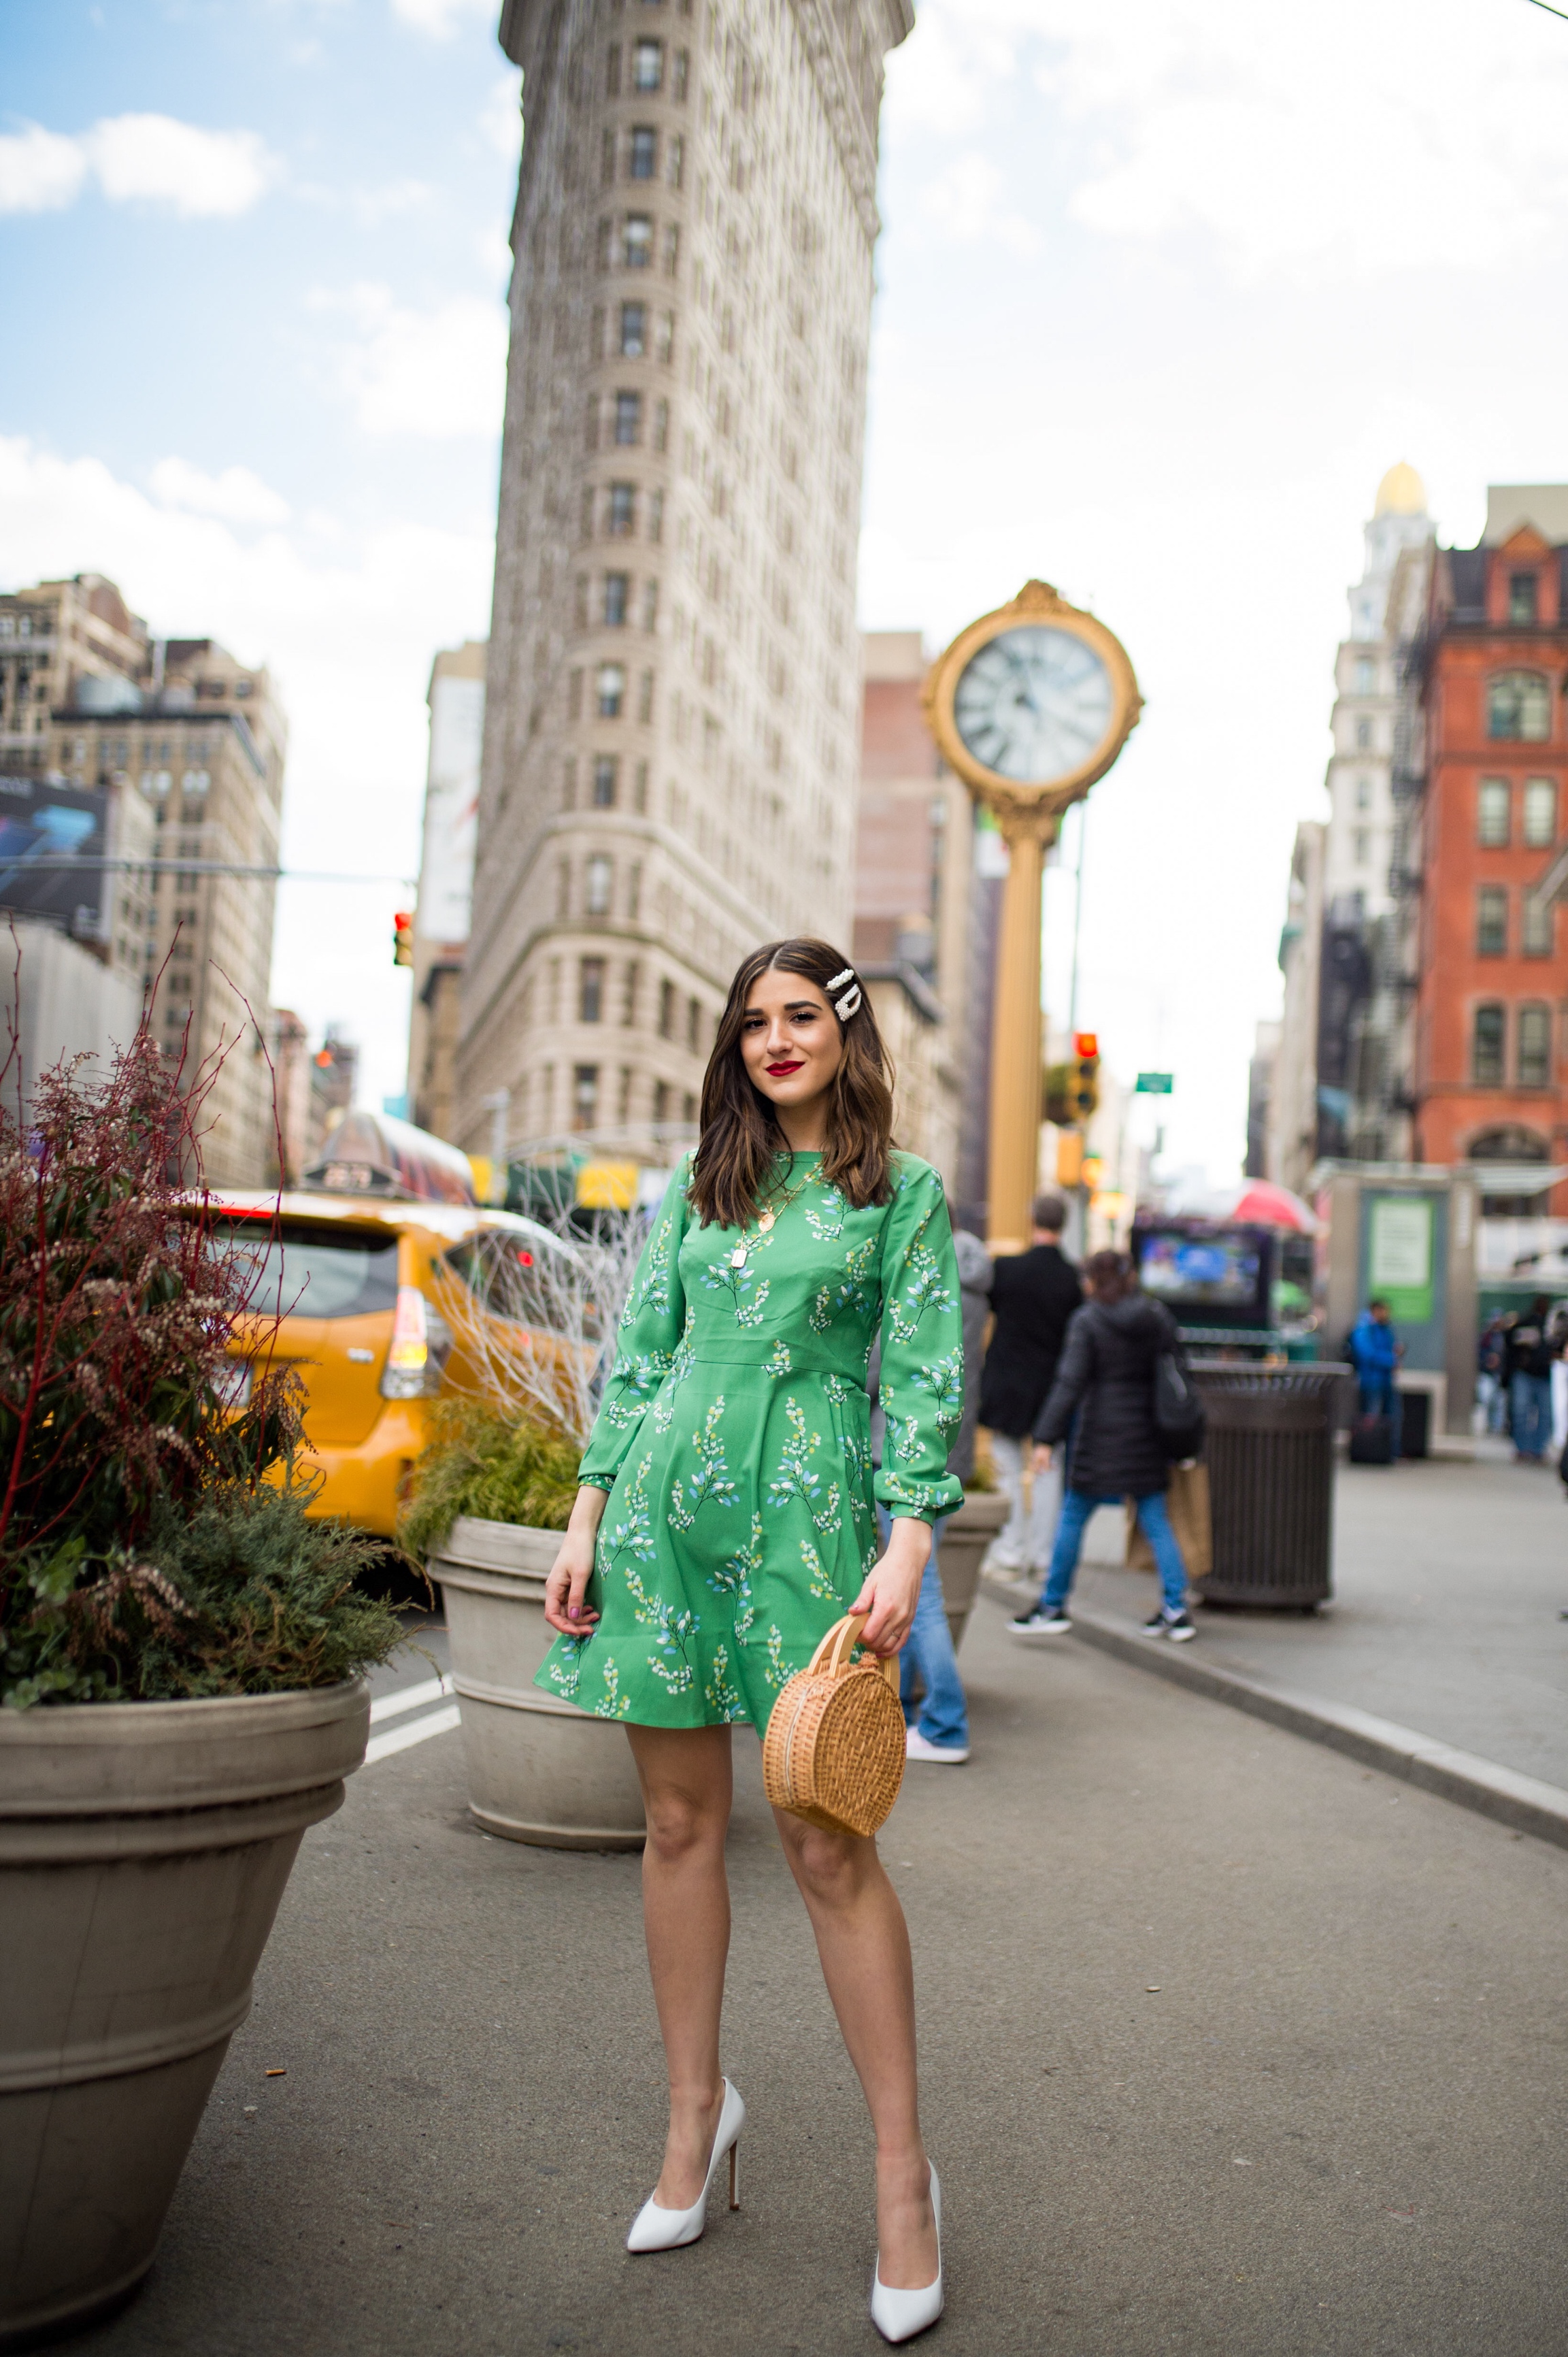 Styling Green For Spring LOFT Esther Santer Fashion Blog NYC Street Style Blogger Outfit OOTD Trendy Shopping White Heels Basket Circle Bag Florals Hair Accessories Pearl Clips Flatiron  Photoshoot Inspo Inspiration Petite Dress Inclusive Sizing Bag.jpg